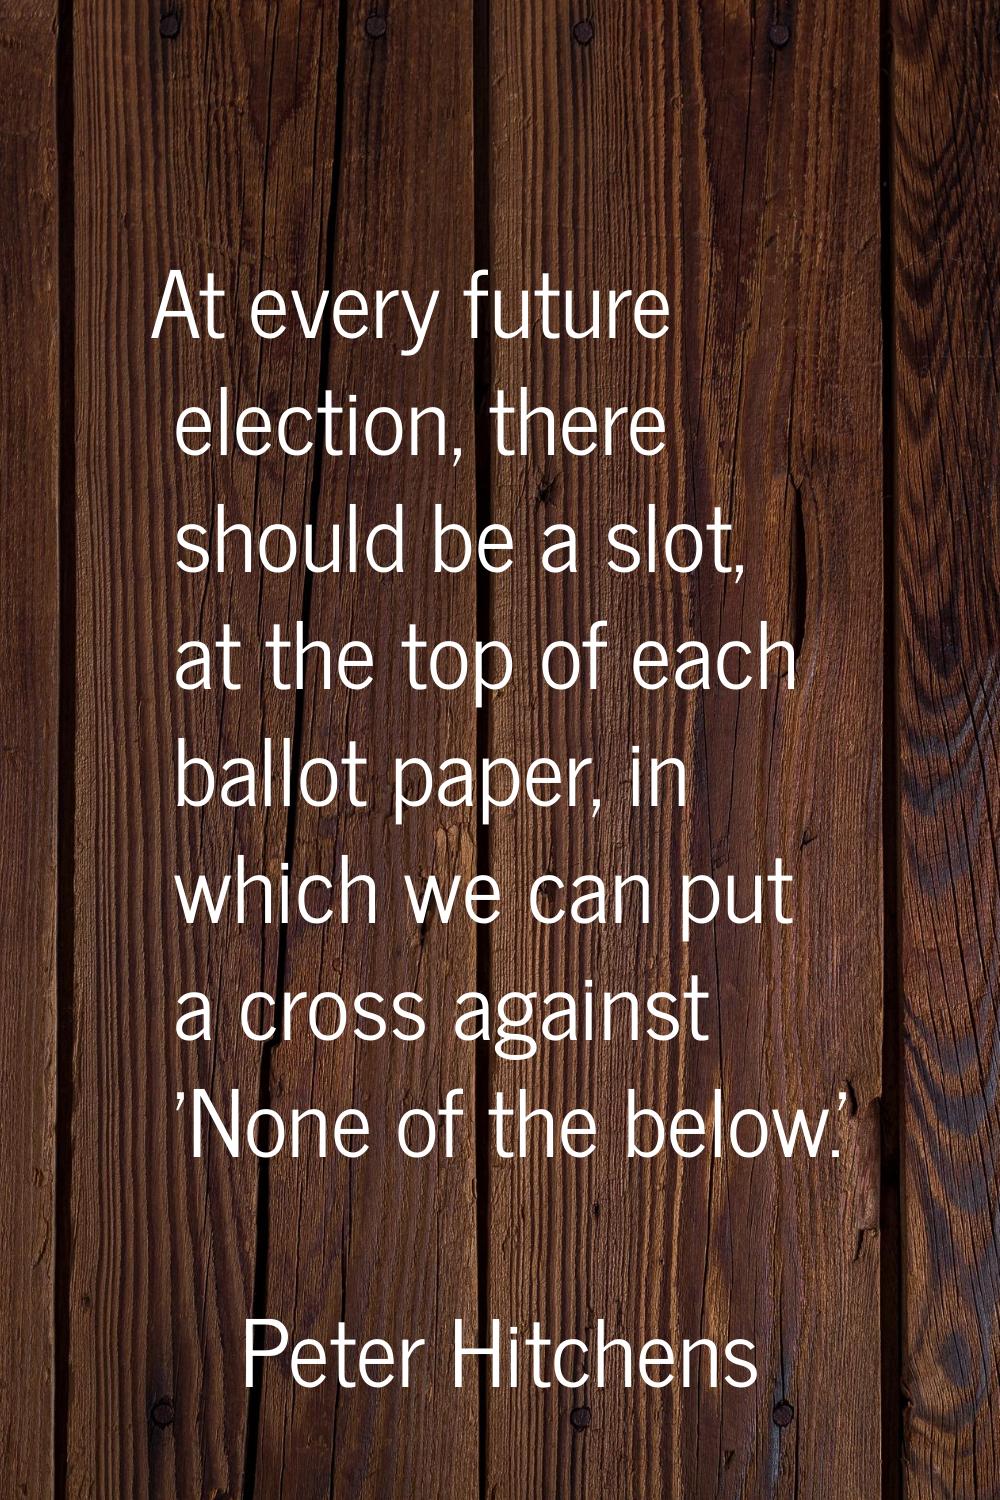 At every future election, there should be a slot, at the top of each ballot paper, in which we can 